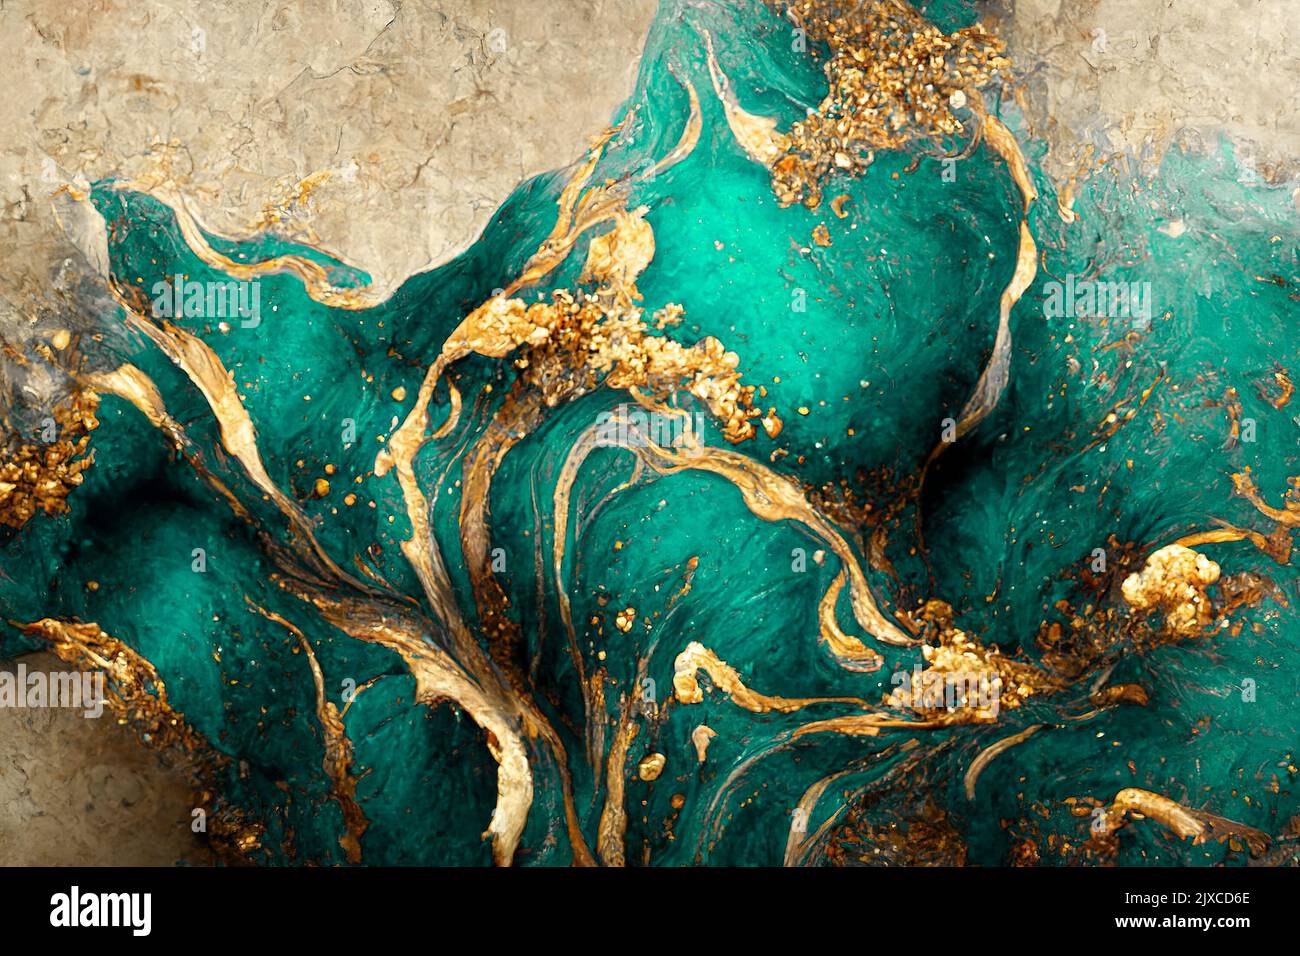 Spectacular realistic abstract backdrop of a whirlpool of teal and gold. Digital art 3D illustration. Mable with liquid texture like turbulent waves Stock Photo